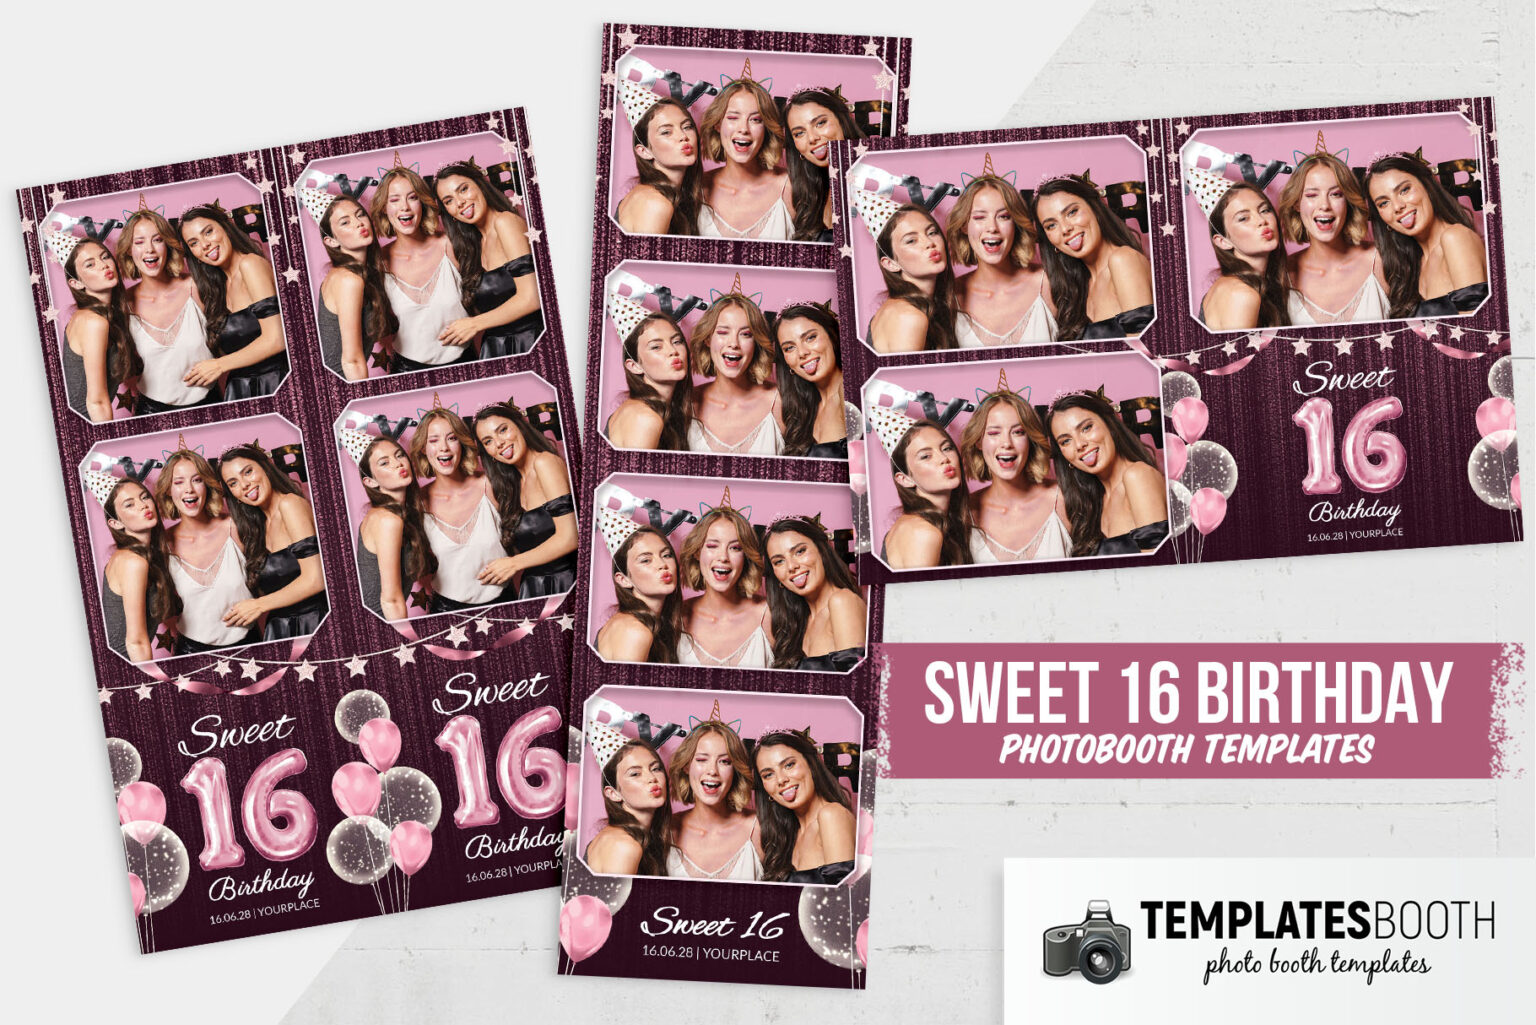 Sweet 16 Photo Booth Template Archives TemplatesBooth